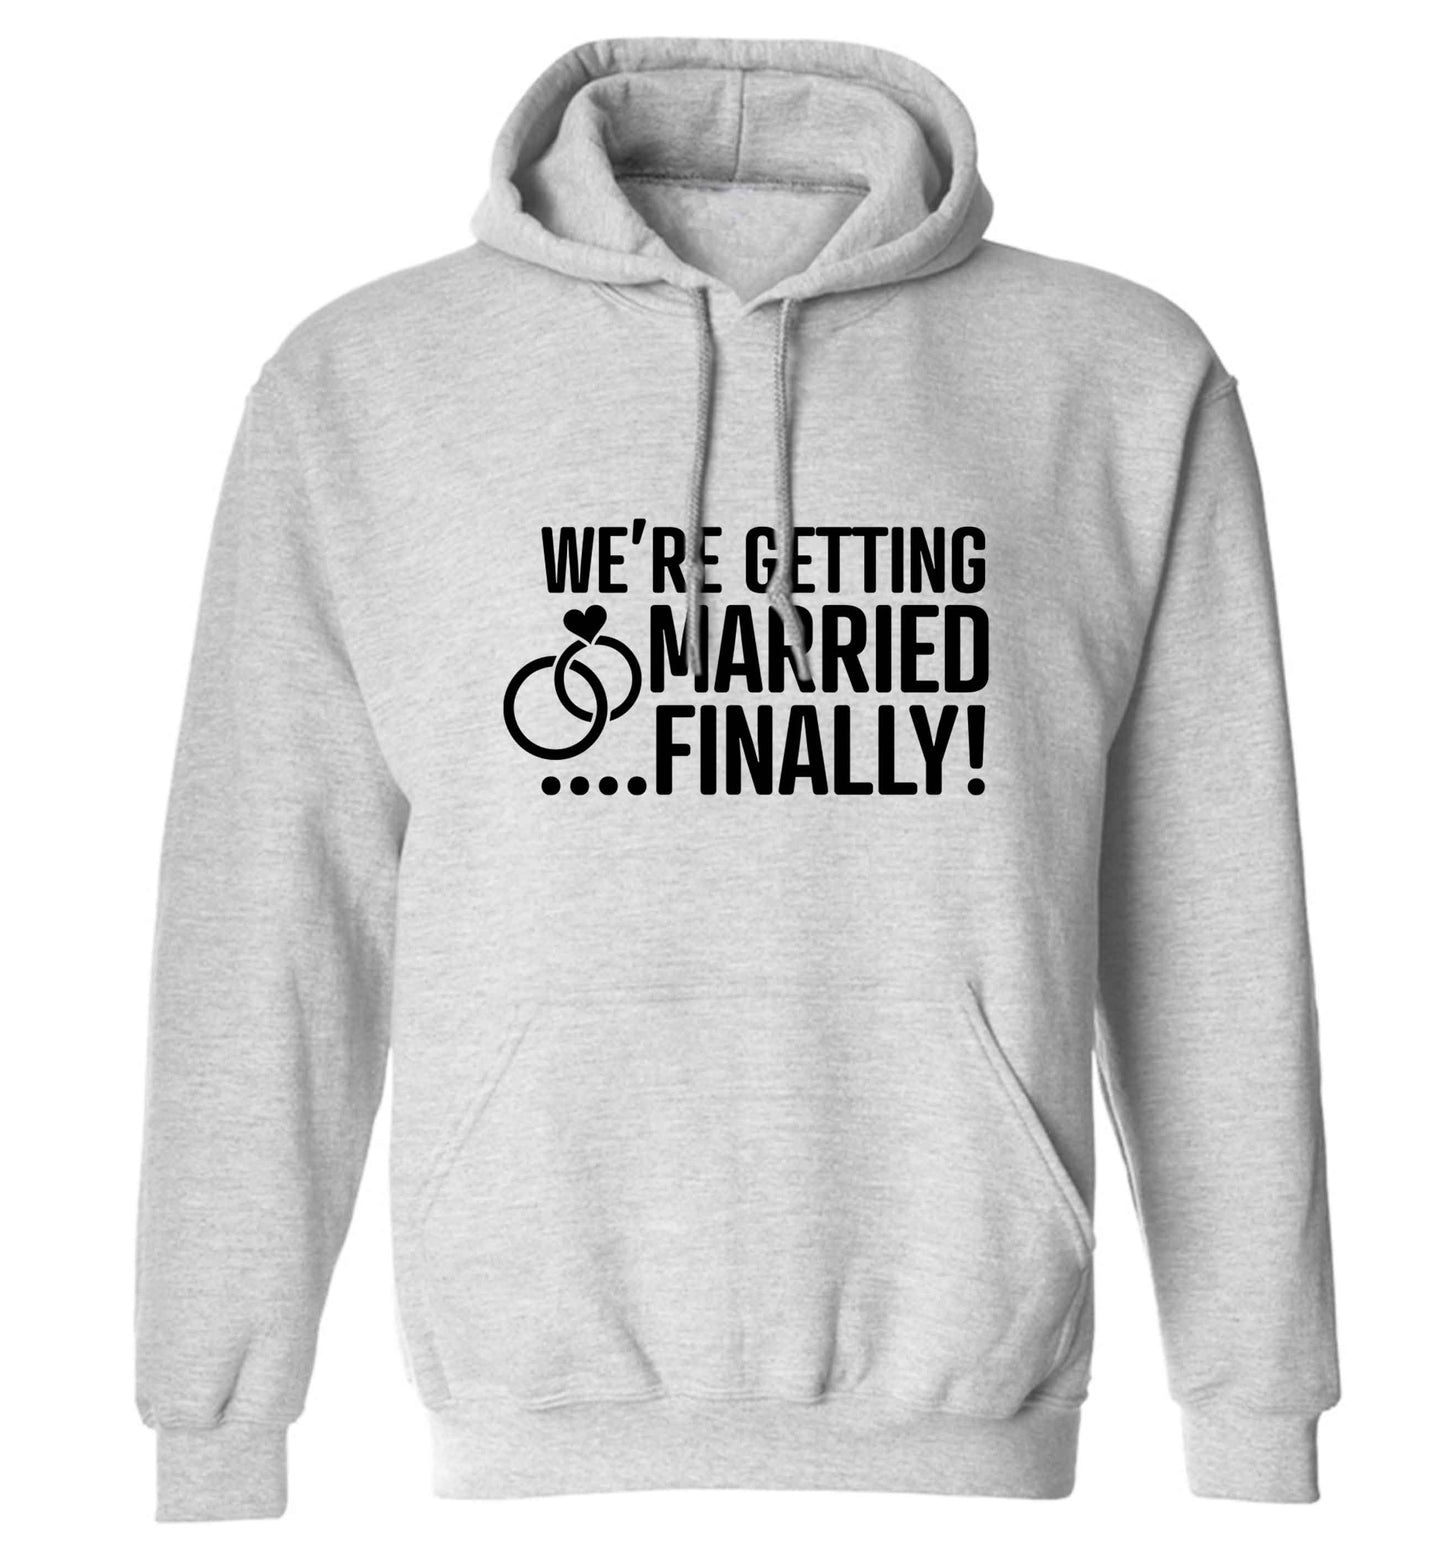 It's been a long wait but it's finally happening! Let everyone know you're celebrating your big day soon! adults unisex grey hoodie 2XL